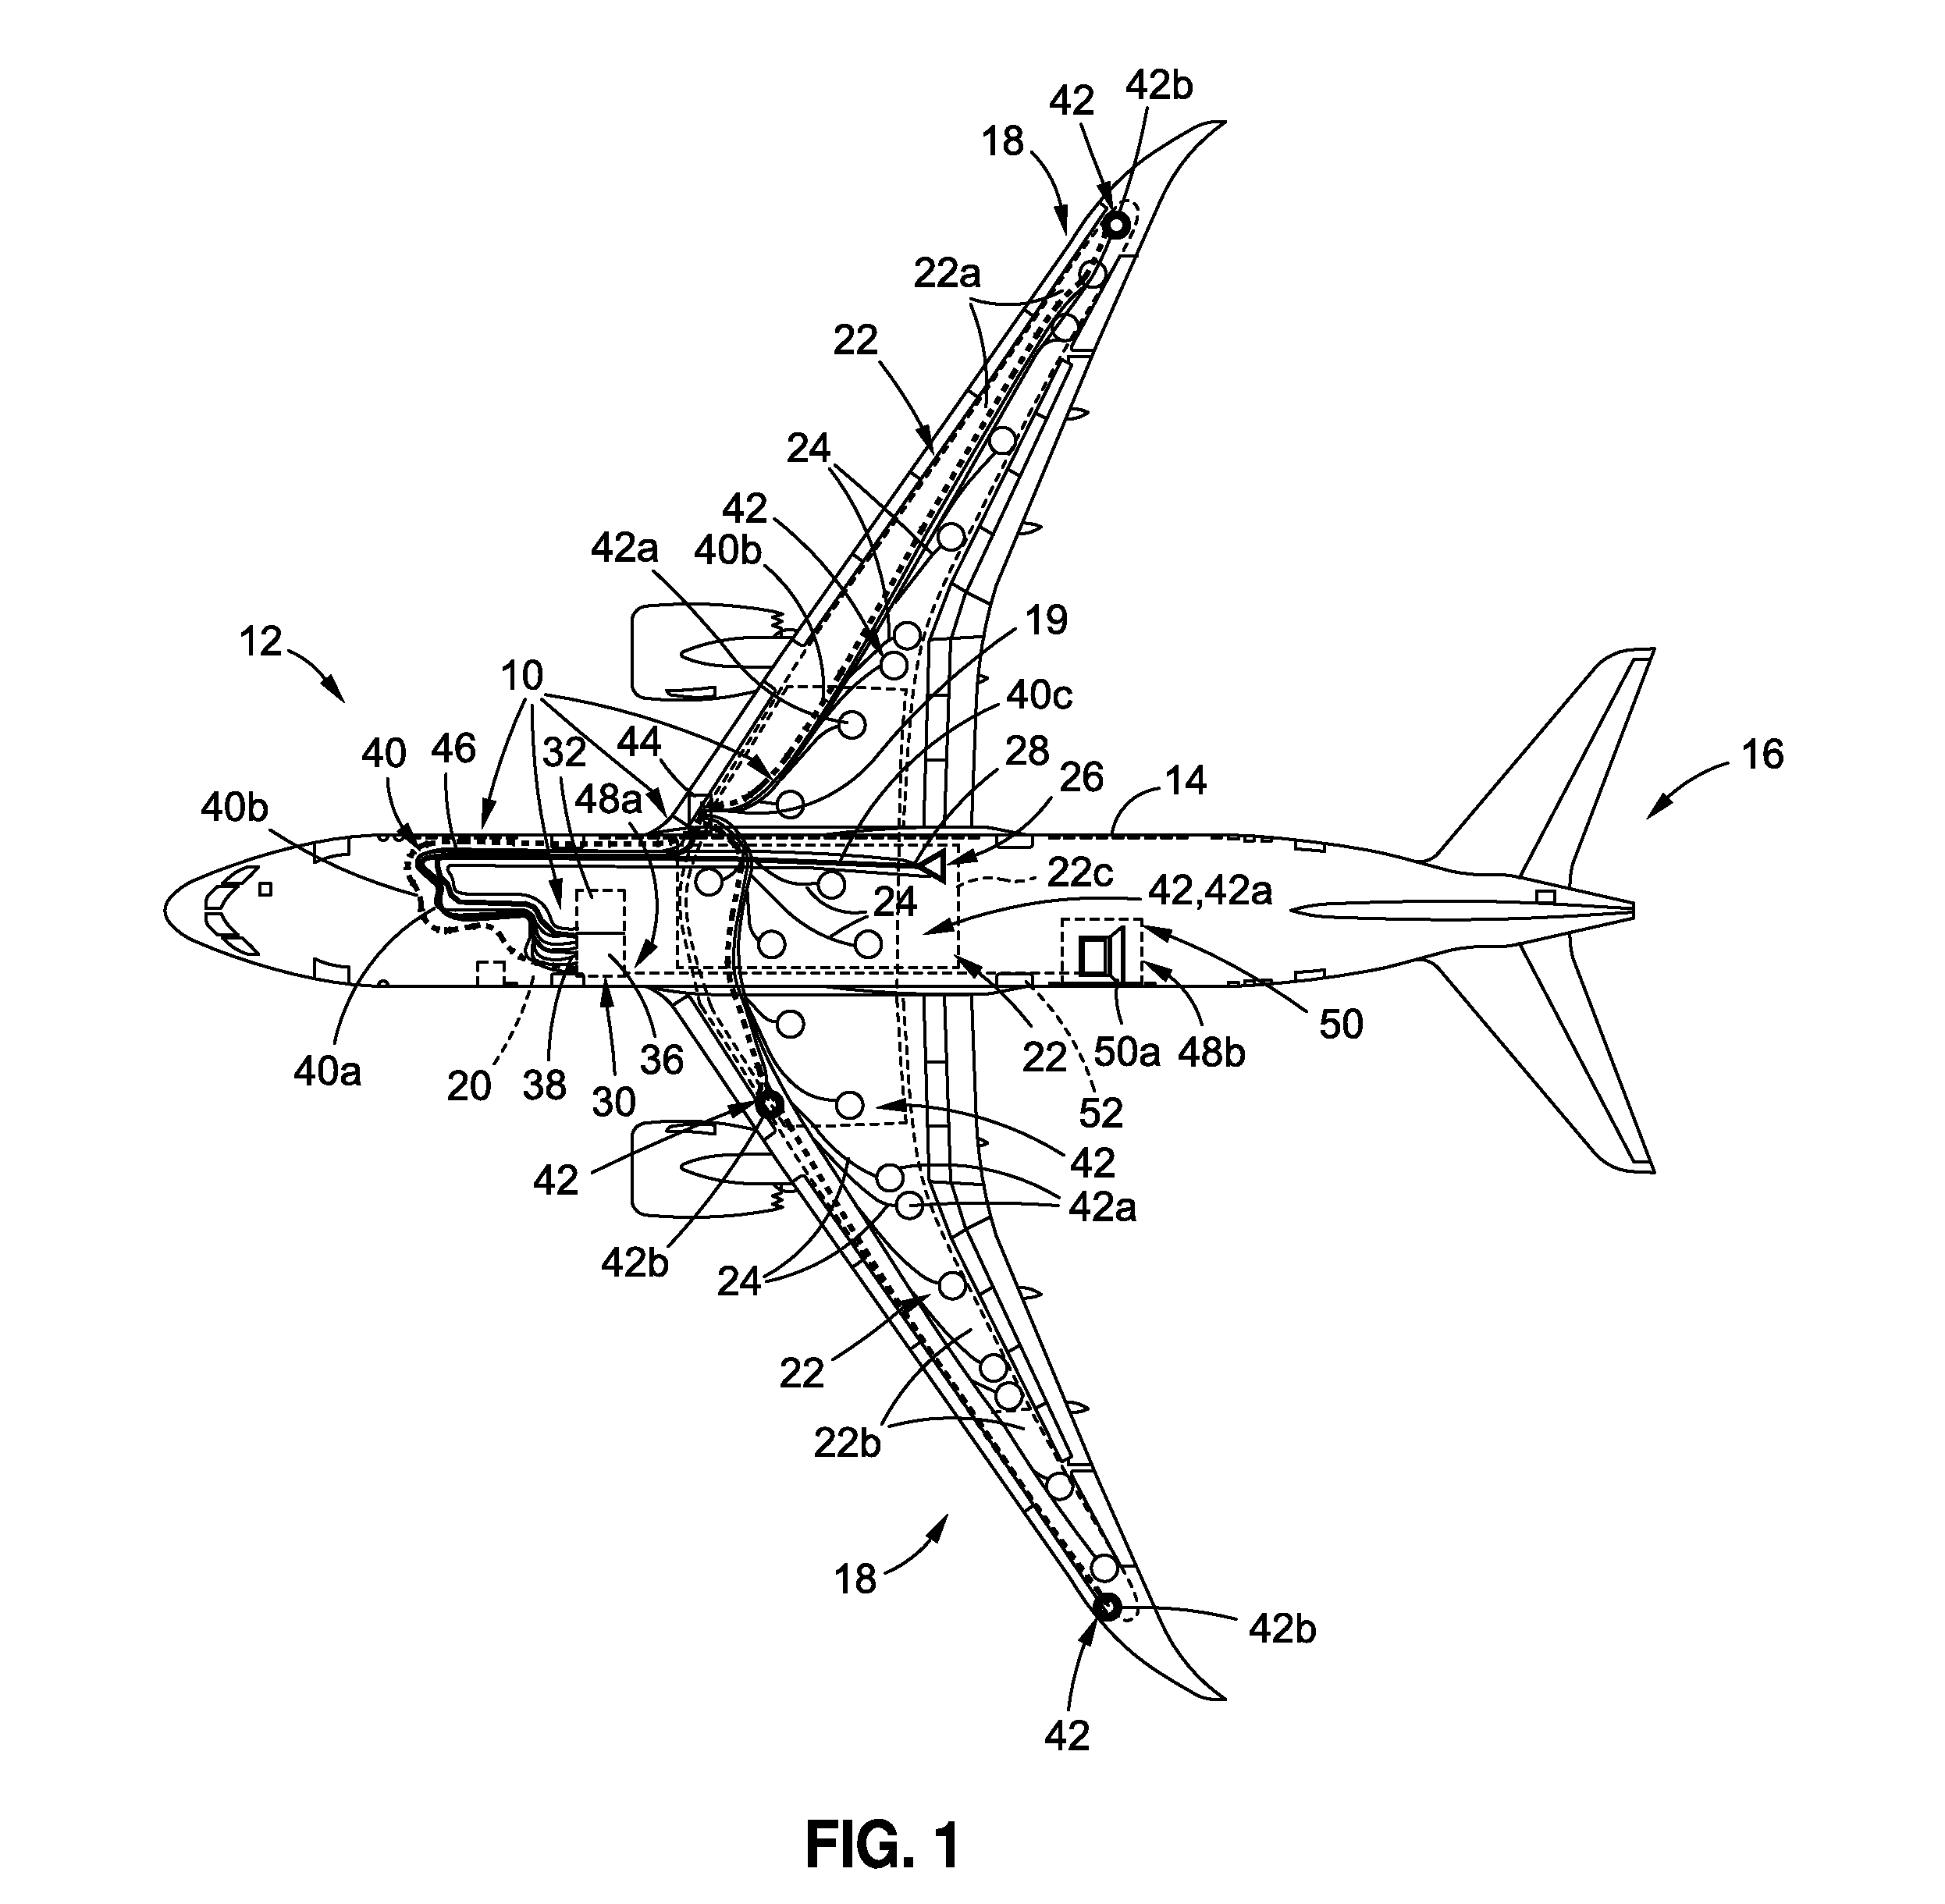 Oxygen analysis system and method for measuring, monitoring and recording oxygen concentration in aircraft fuel tanks